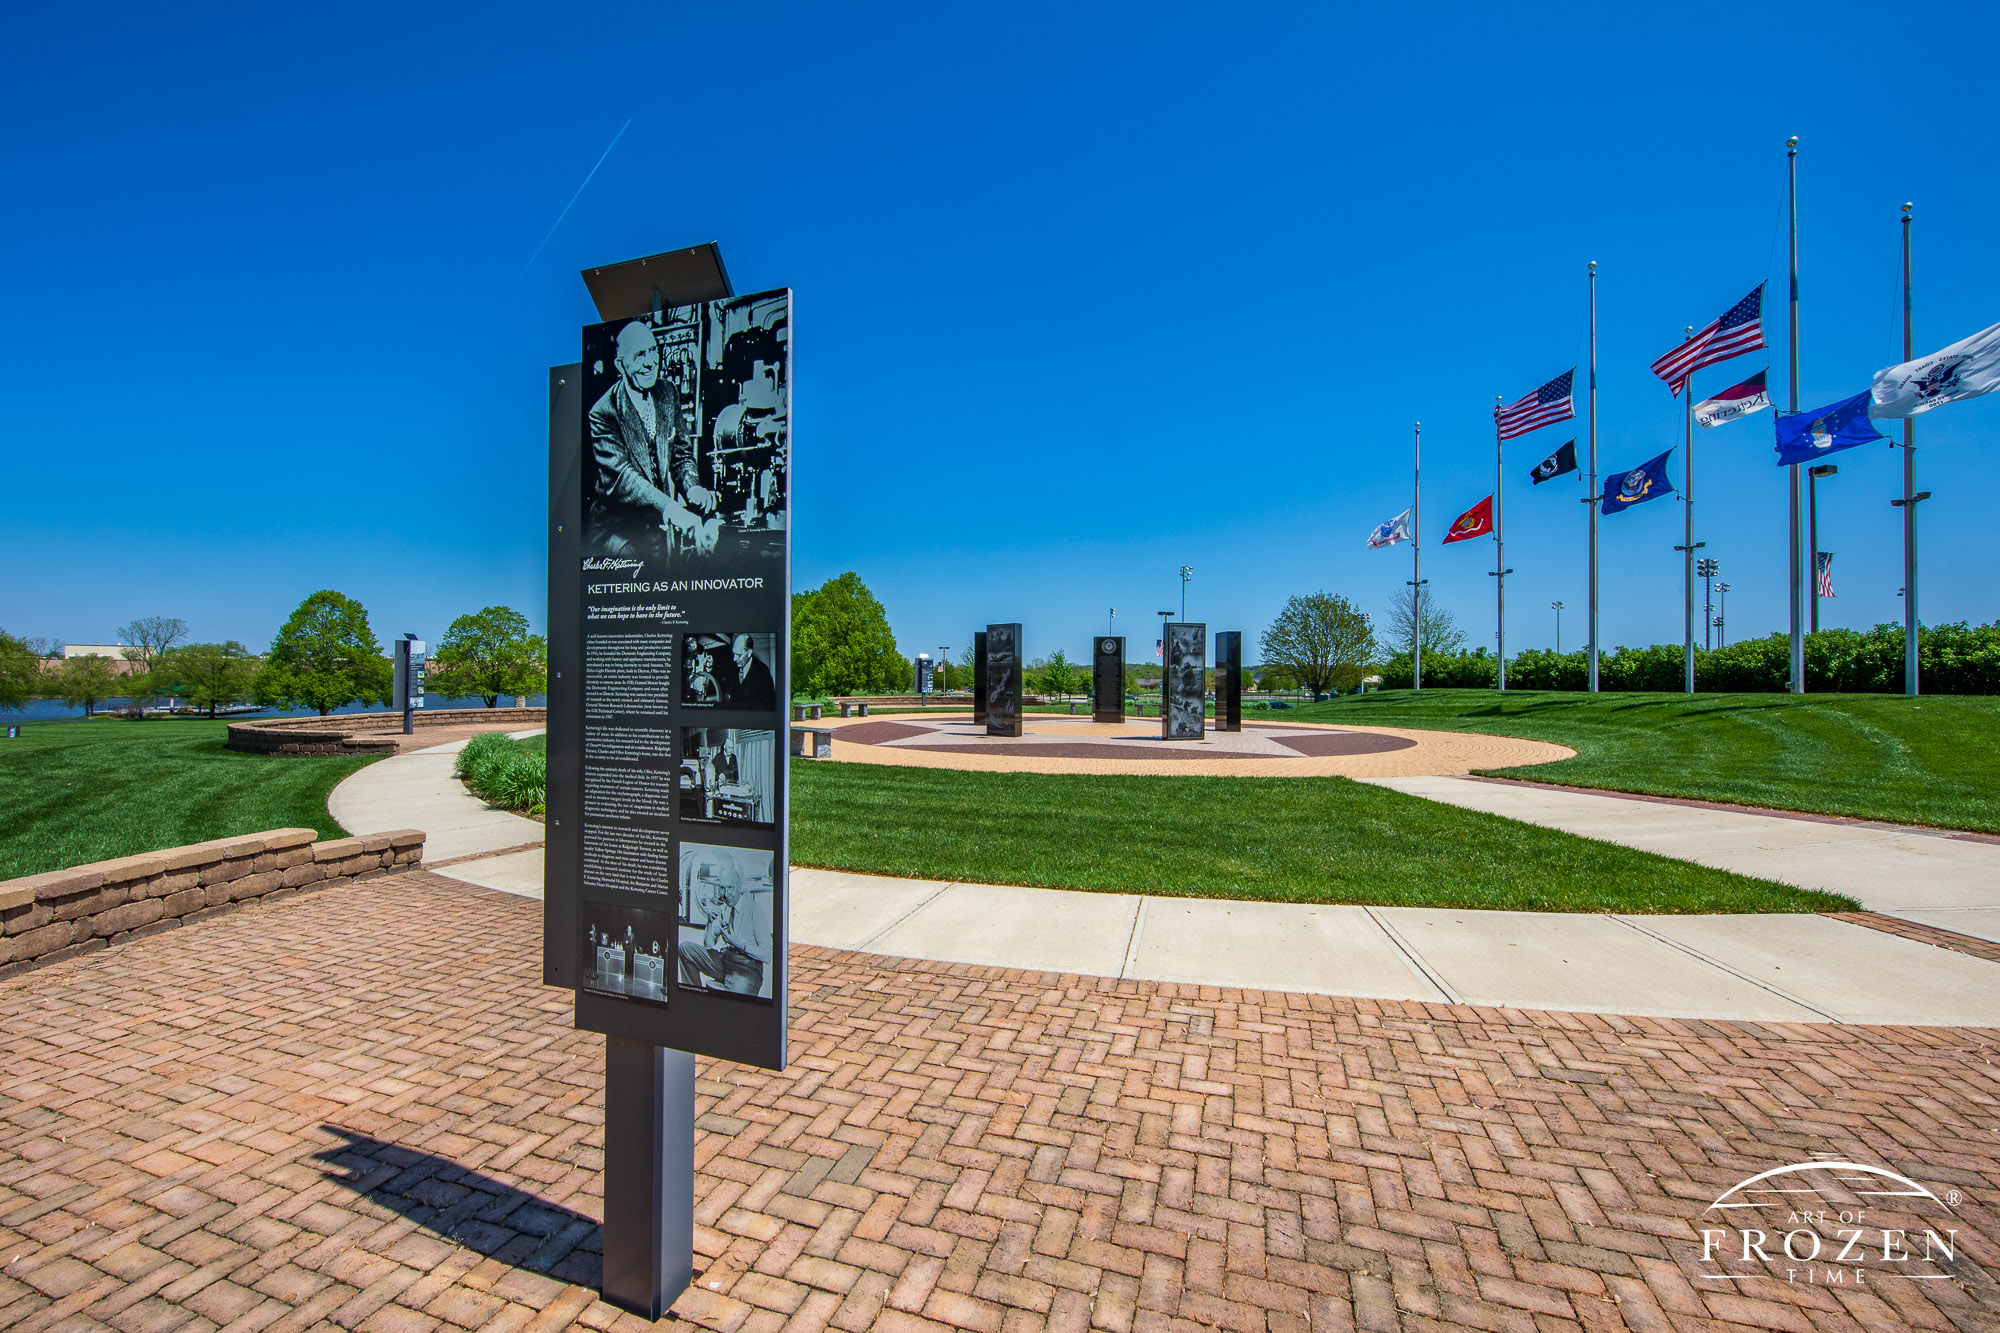 A scene from Delco Park that captures the Charles F. Kettering History Walk and the Kettering Veterans Memorial on a gorgeous spring day where the flags flap in the gentle wind under blue skies.